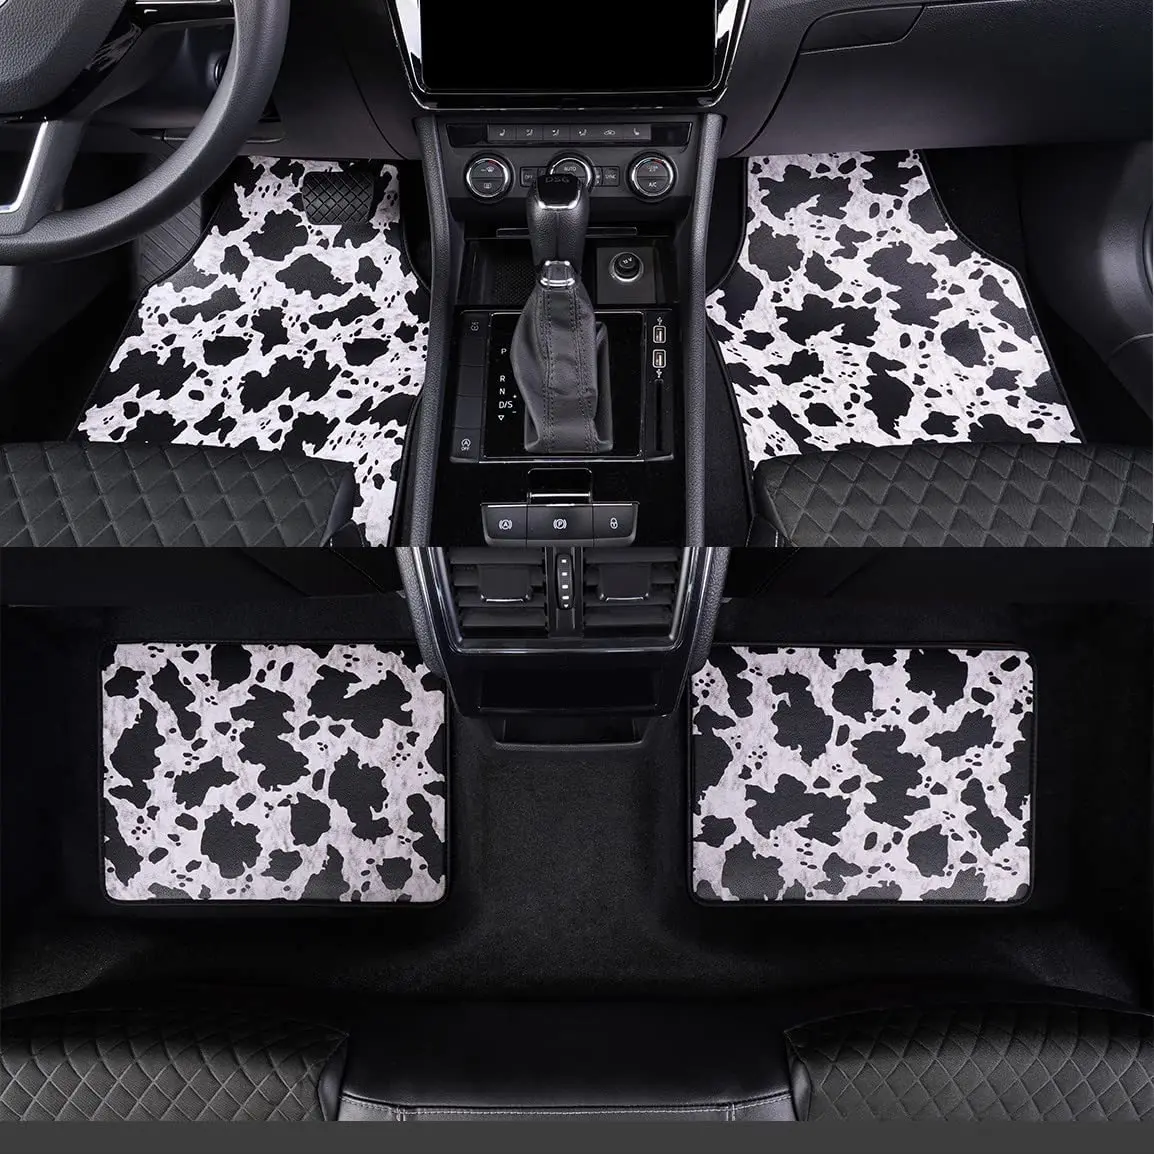 

LSBS Car Floor Mat, Cow Print, All Weather Protection, Faux Leather, Universal Fit for Cars Truck Van and SUV for Women and Men